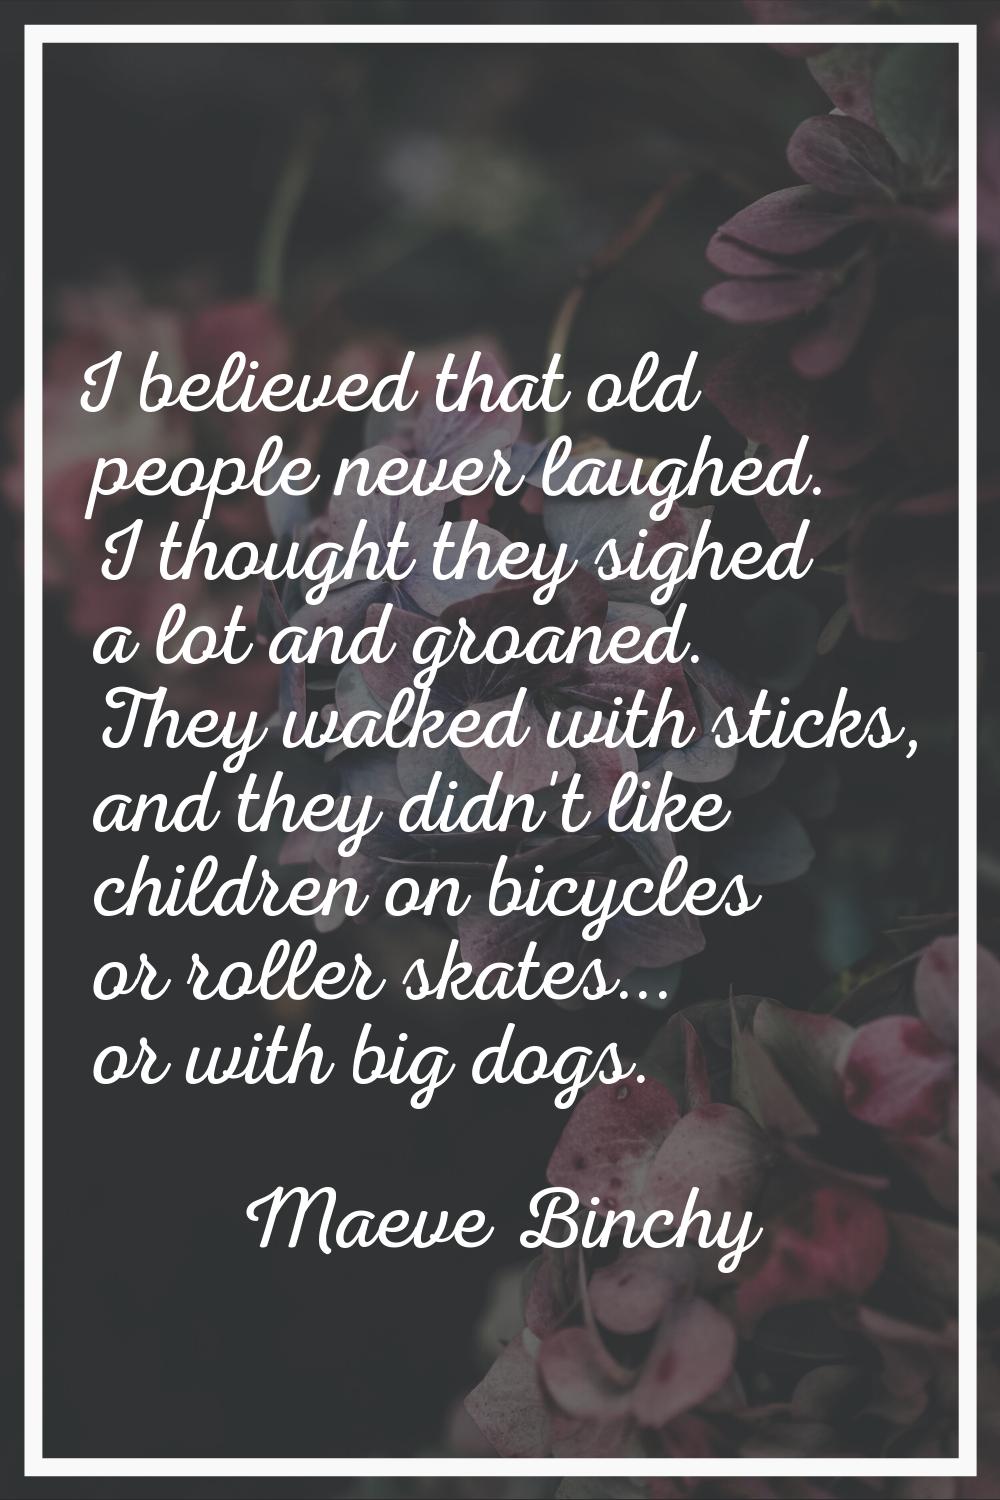 I believed that old people never laughed. I thought they sighed a lot and groaned. They walked with